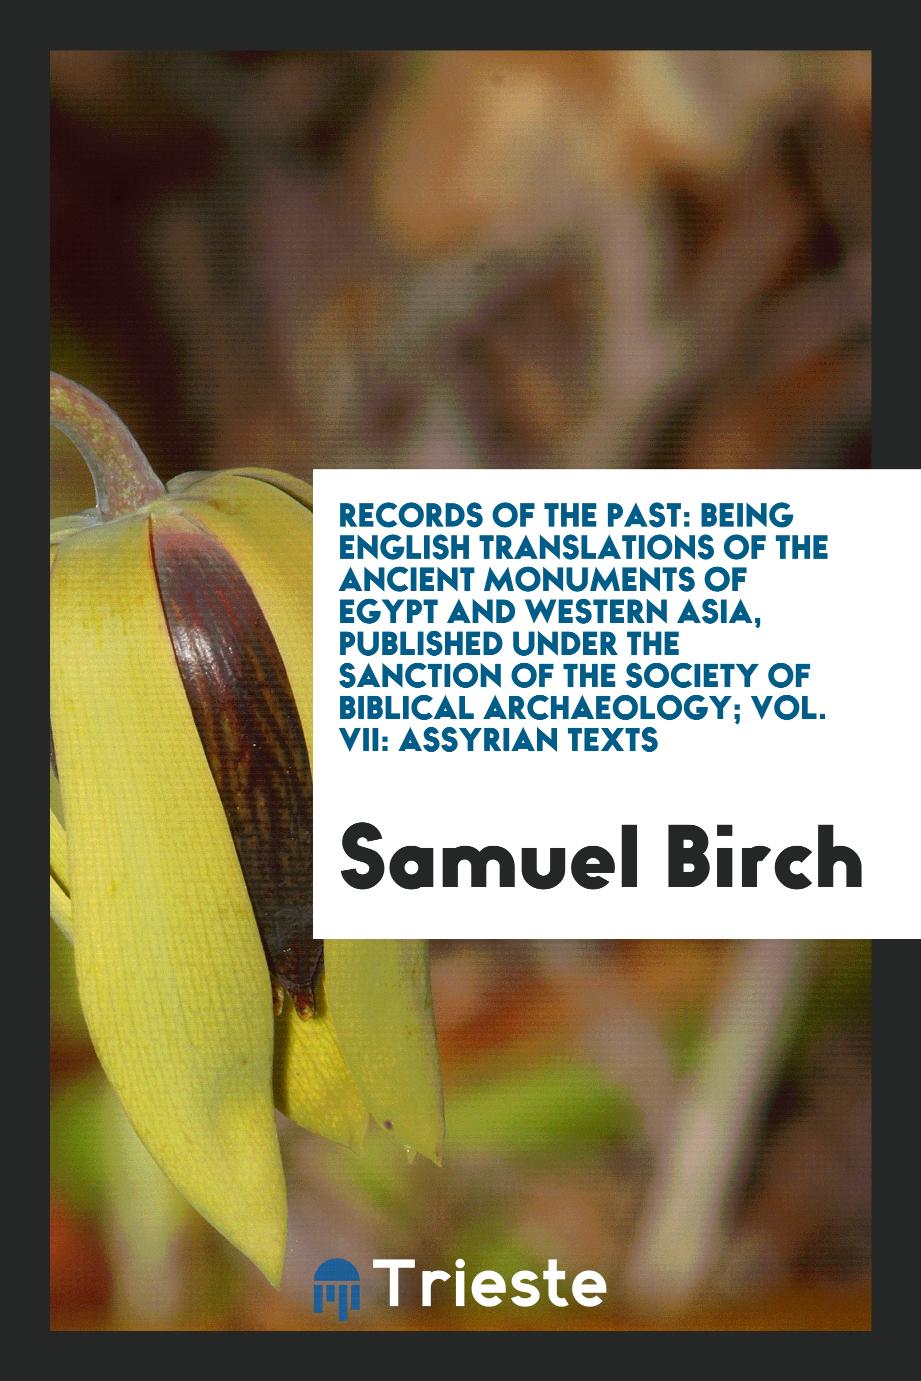 Records of the past: being English translations of the Ancient monuments of Egypt and western Asia, published under the sanction of the Society of Biblical Archaeology; Vol. VII: Assyrian texts